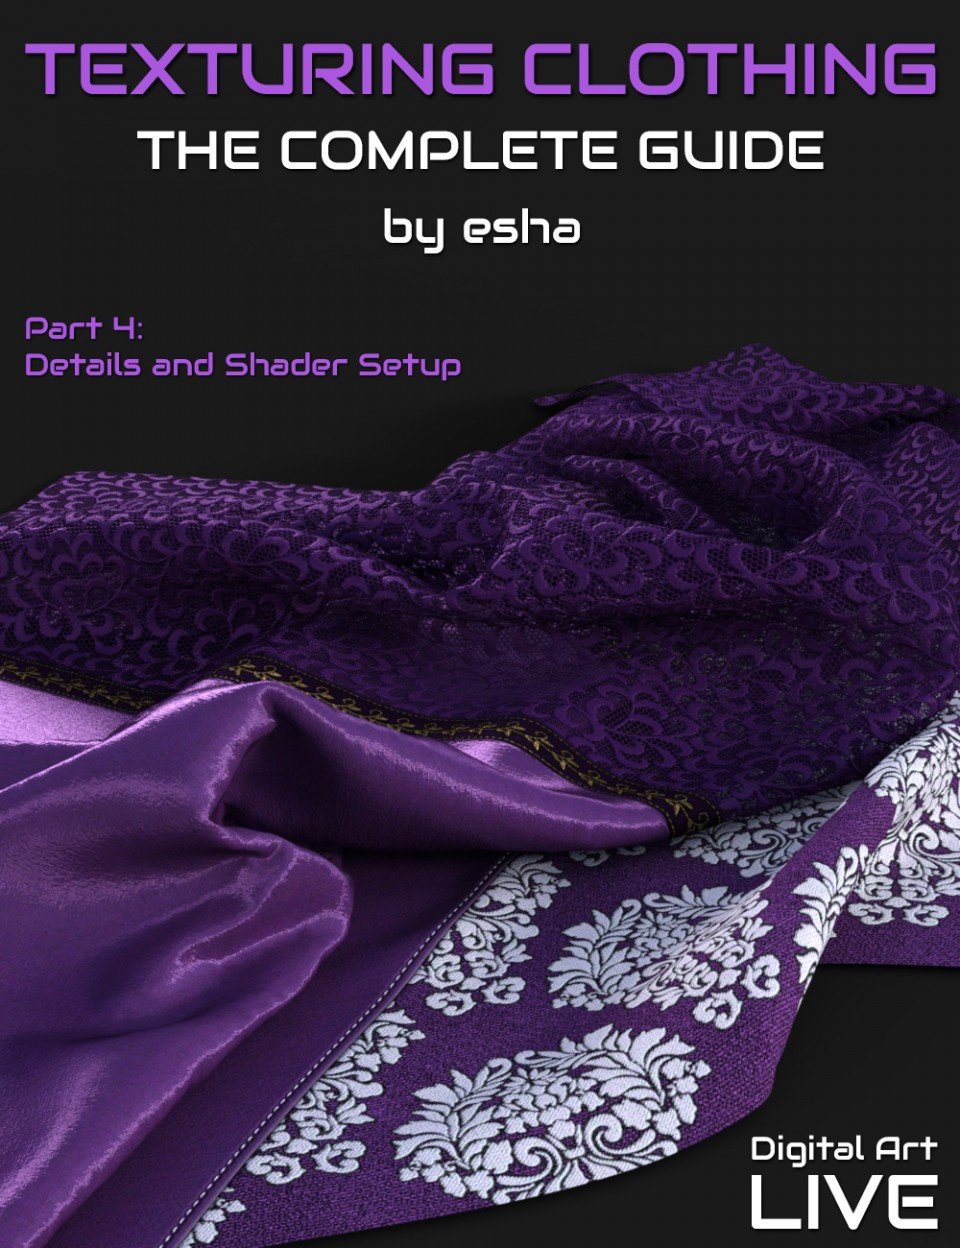 The Complete Guide to Texturing Clothing – Part 4_DAZ3D下载站